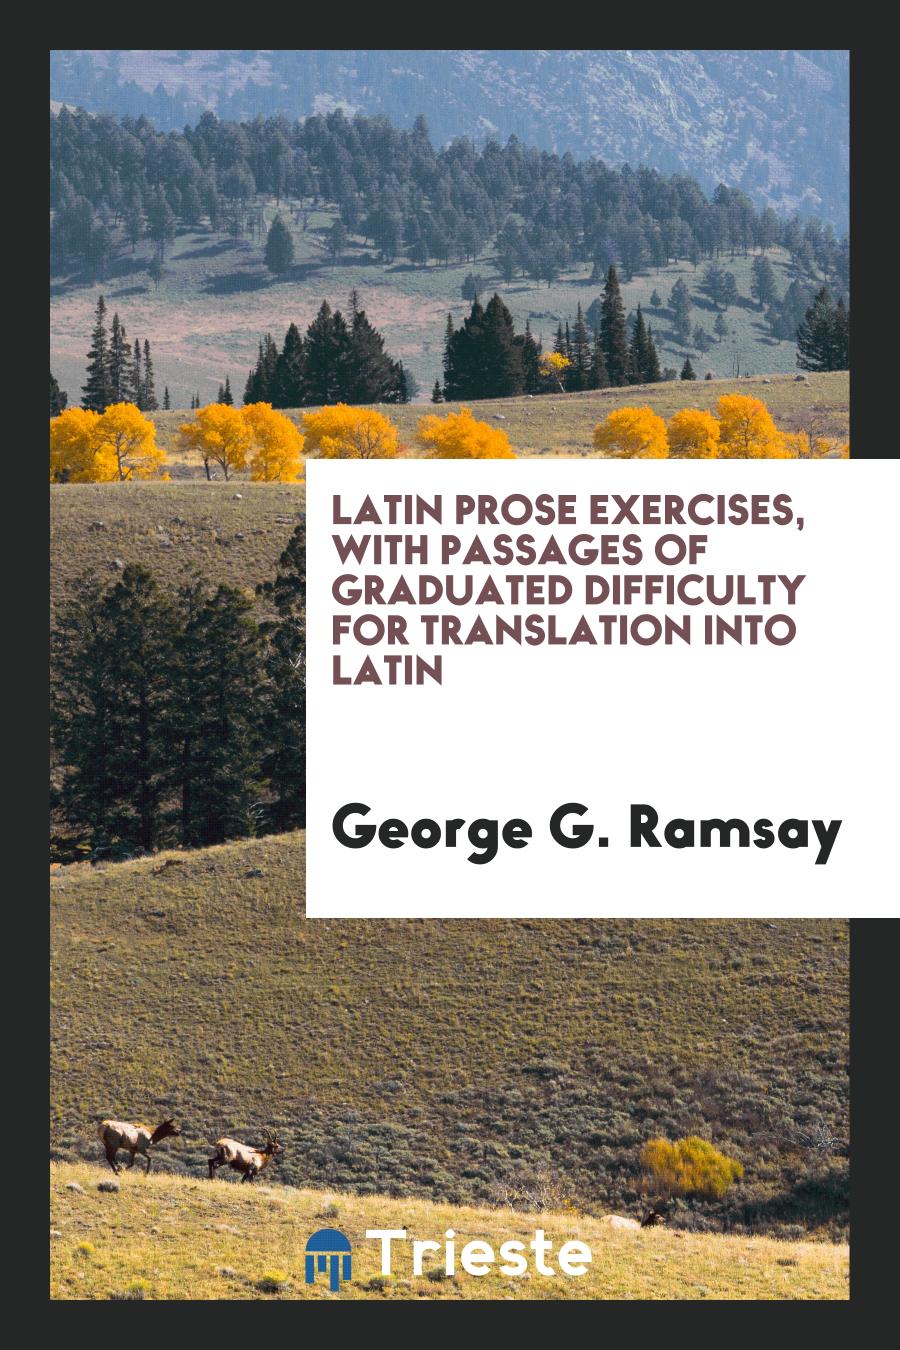 Latin Prose Exercises, with Passages of Graduated Difficulty for Translation into Latin